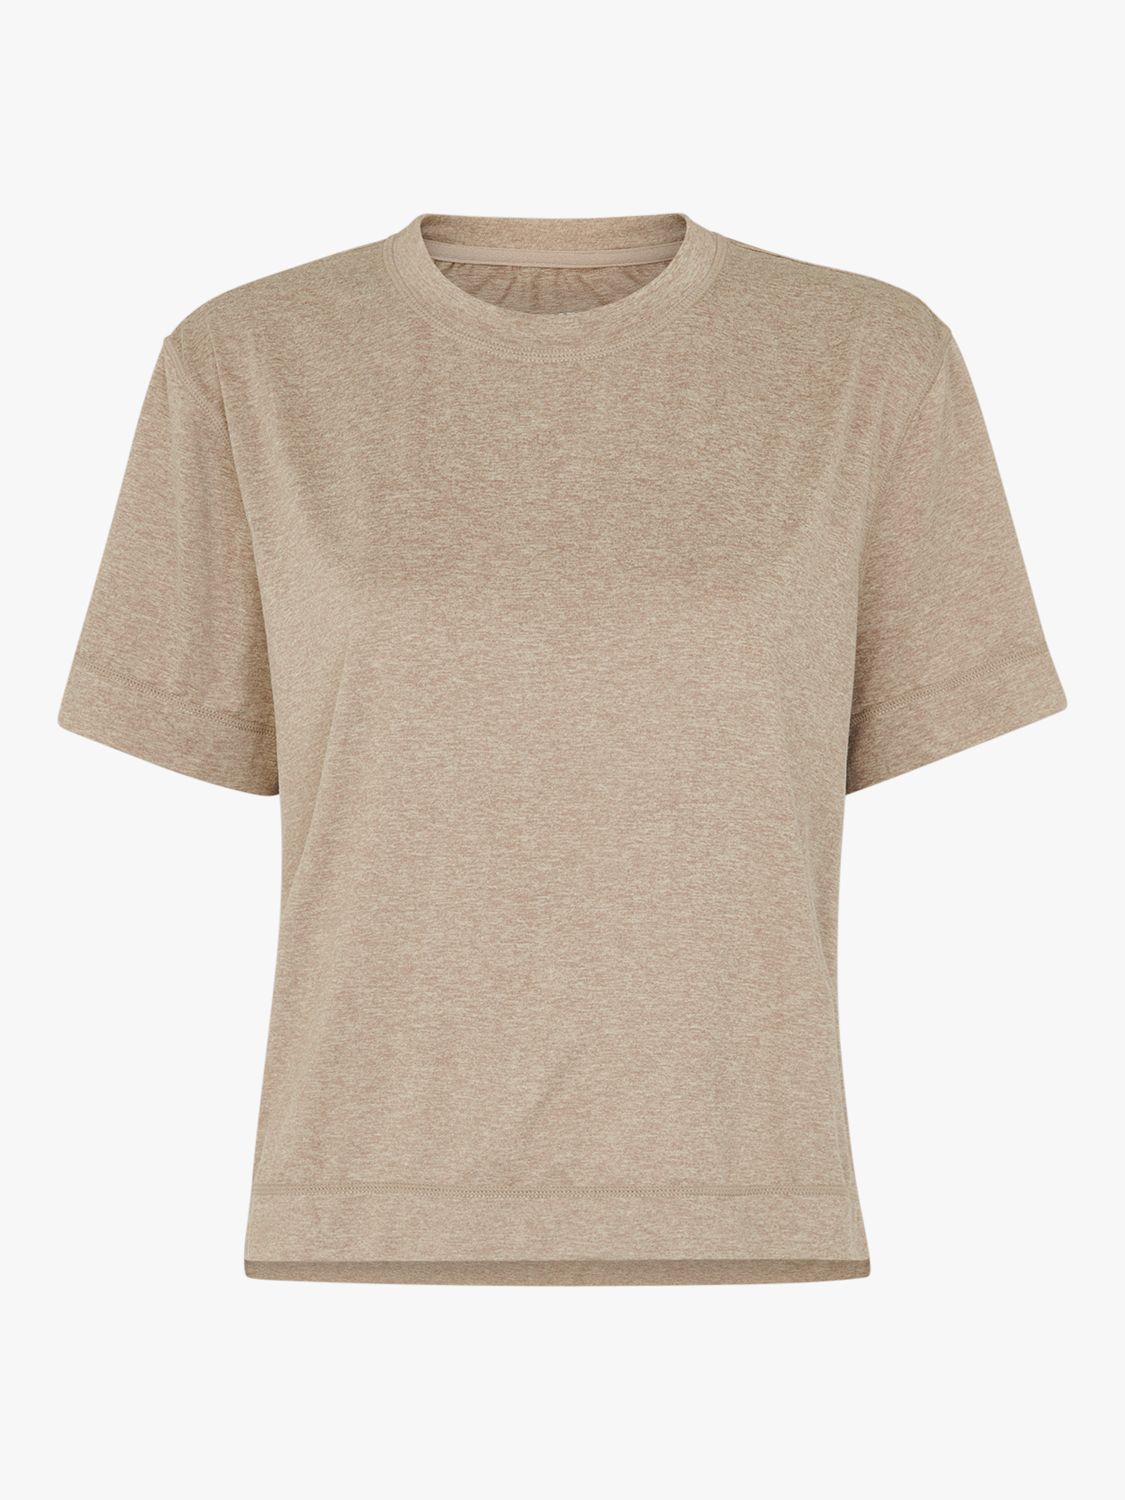 Whistles Ultimate Active T-Shirt, Neutral at John Lewis & Partners